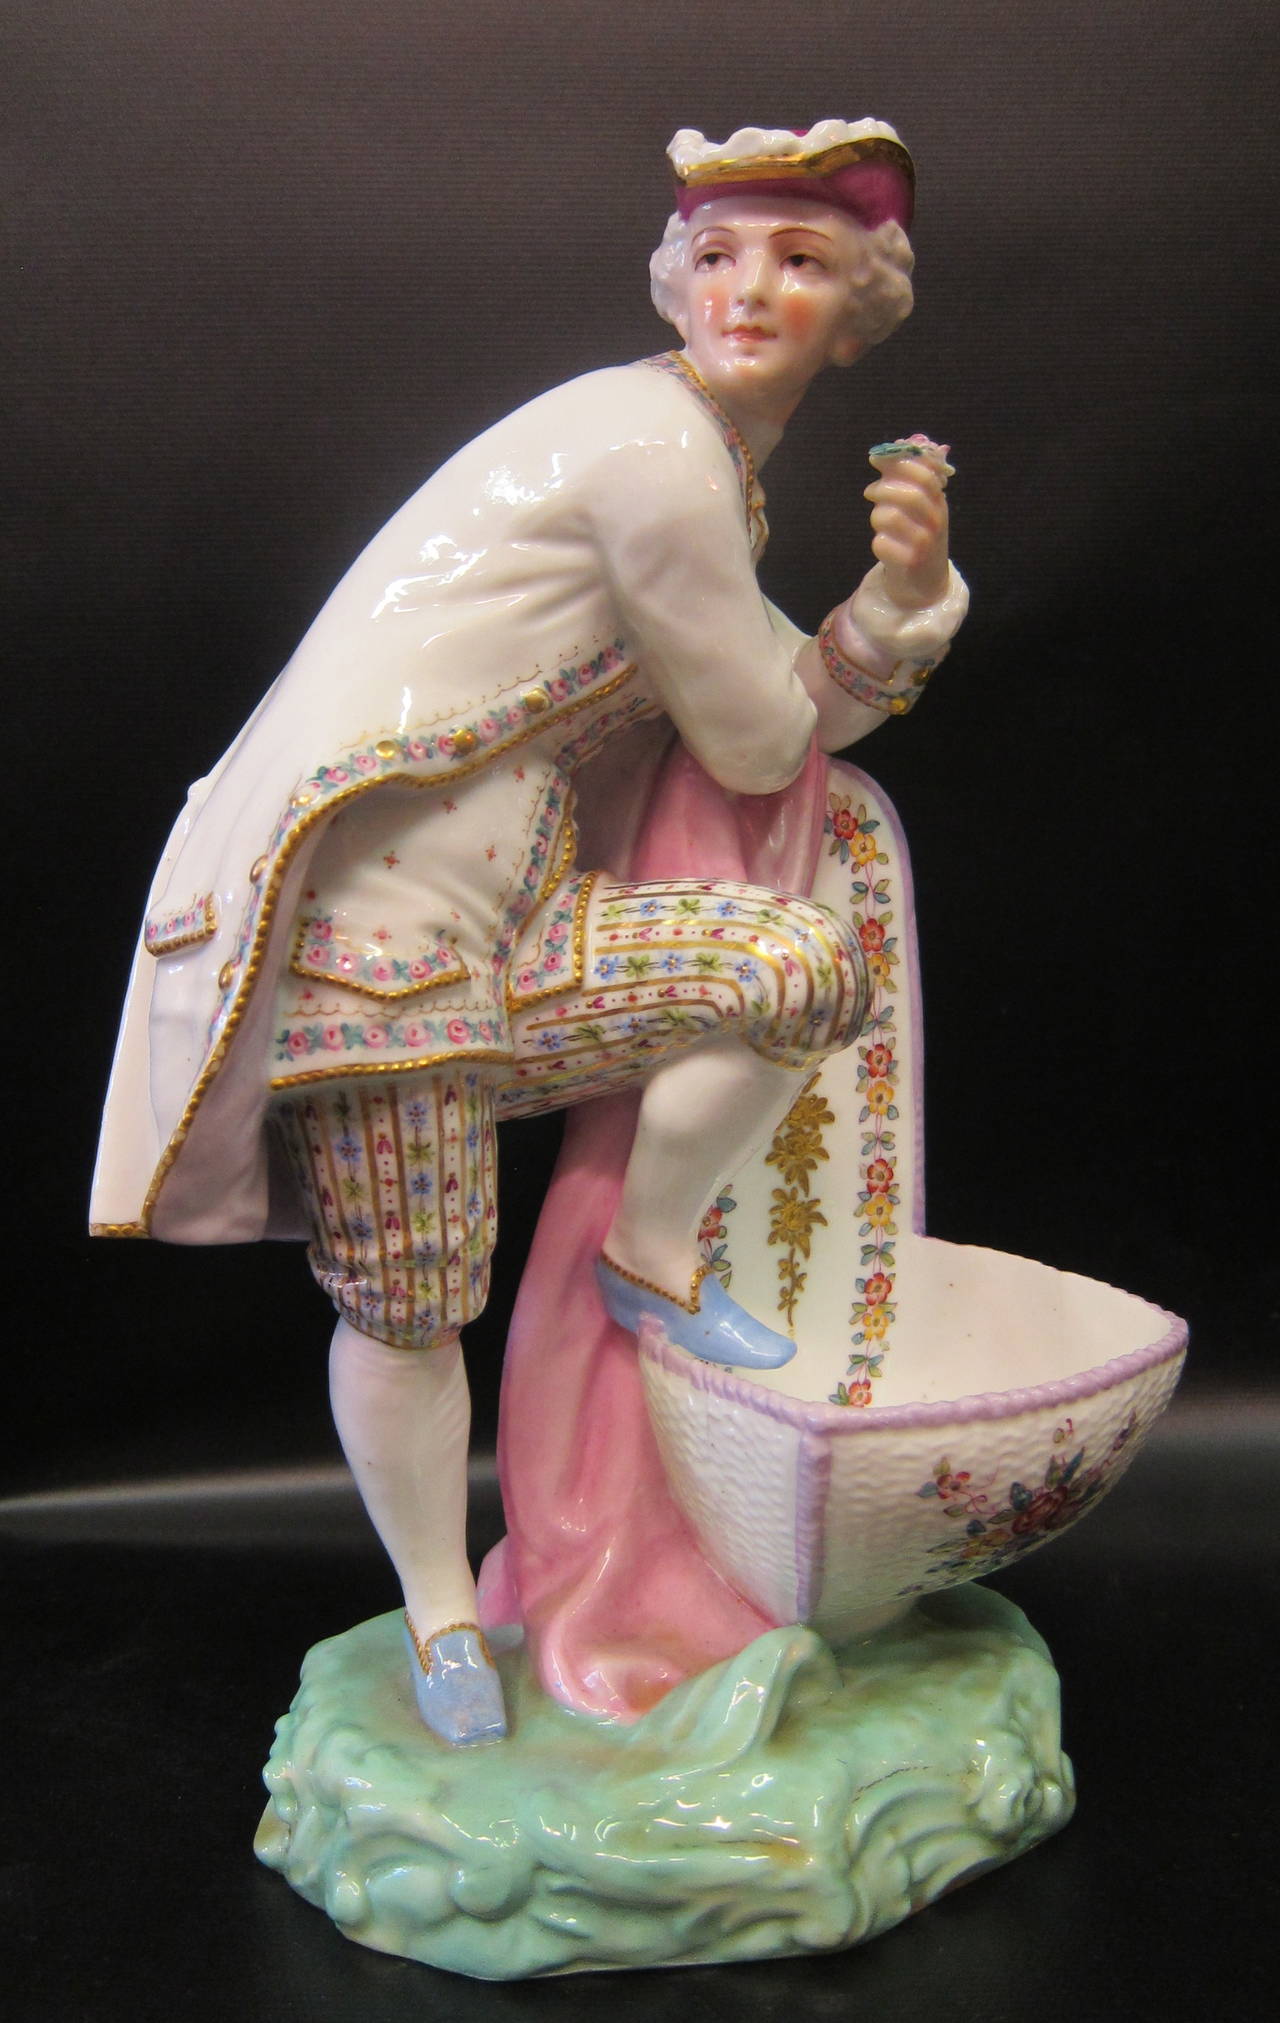 This rare & vintage pair of porcelain table salts features colorfully costumed figures of the country gentry. Each statue is sculpted & detailed with such precision that bespeaks a standard of high quality. Each figure is posed beside a huge master